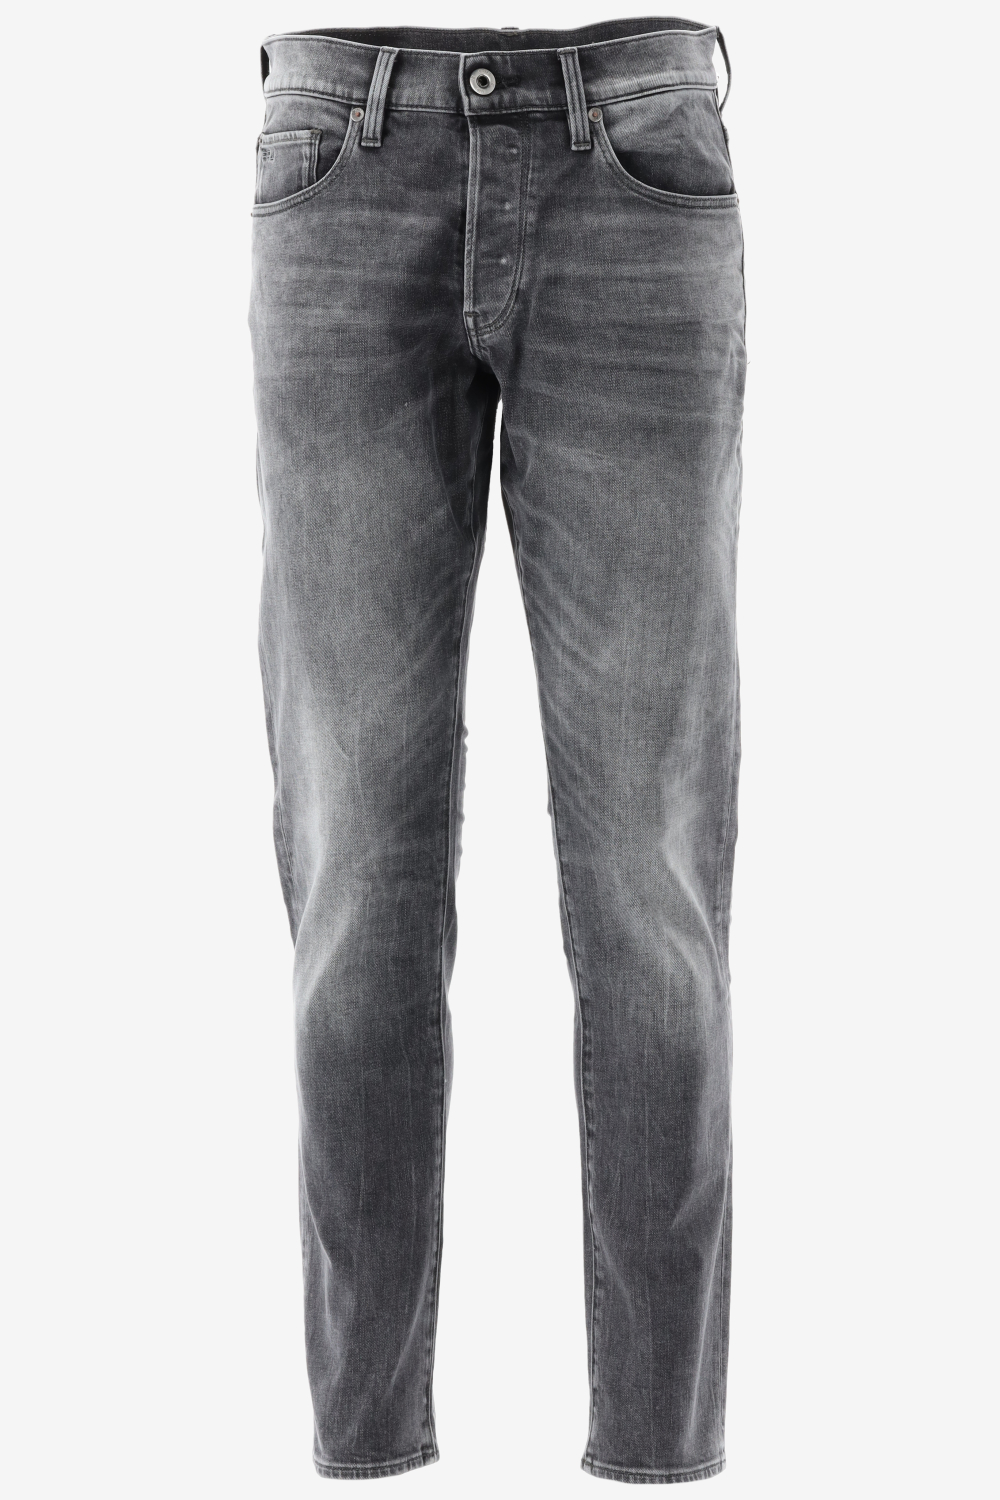 G-Star Tapered Fit 3301 REGULAR TAPERED 